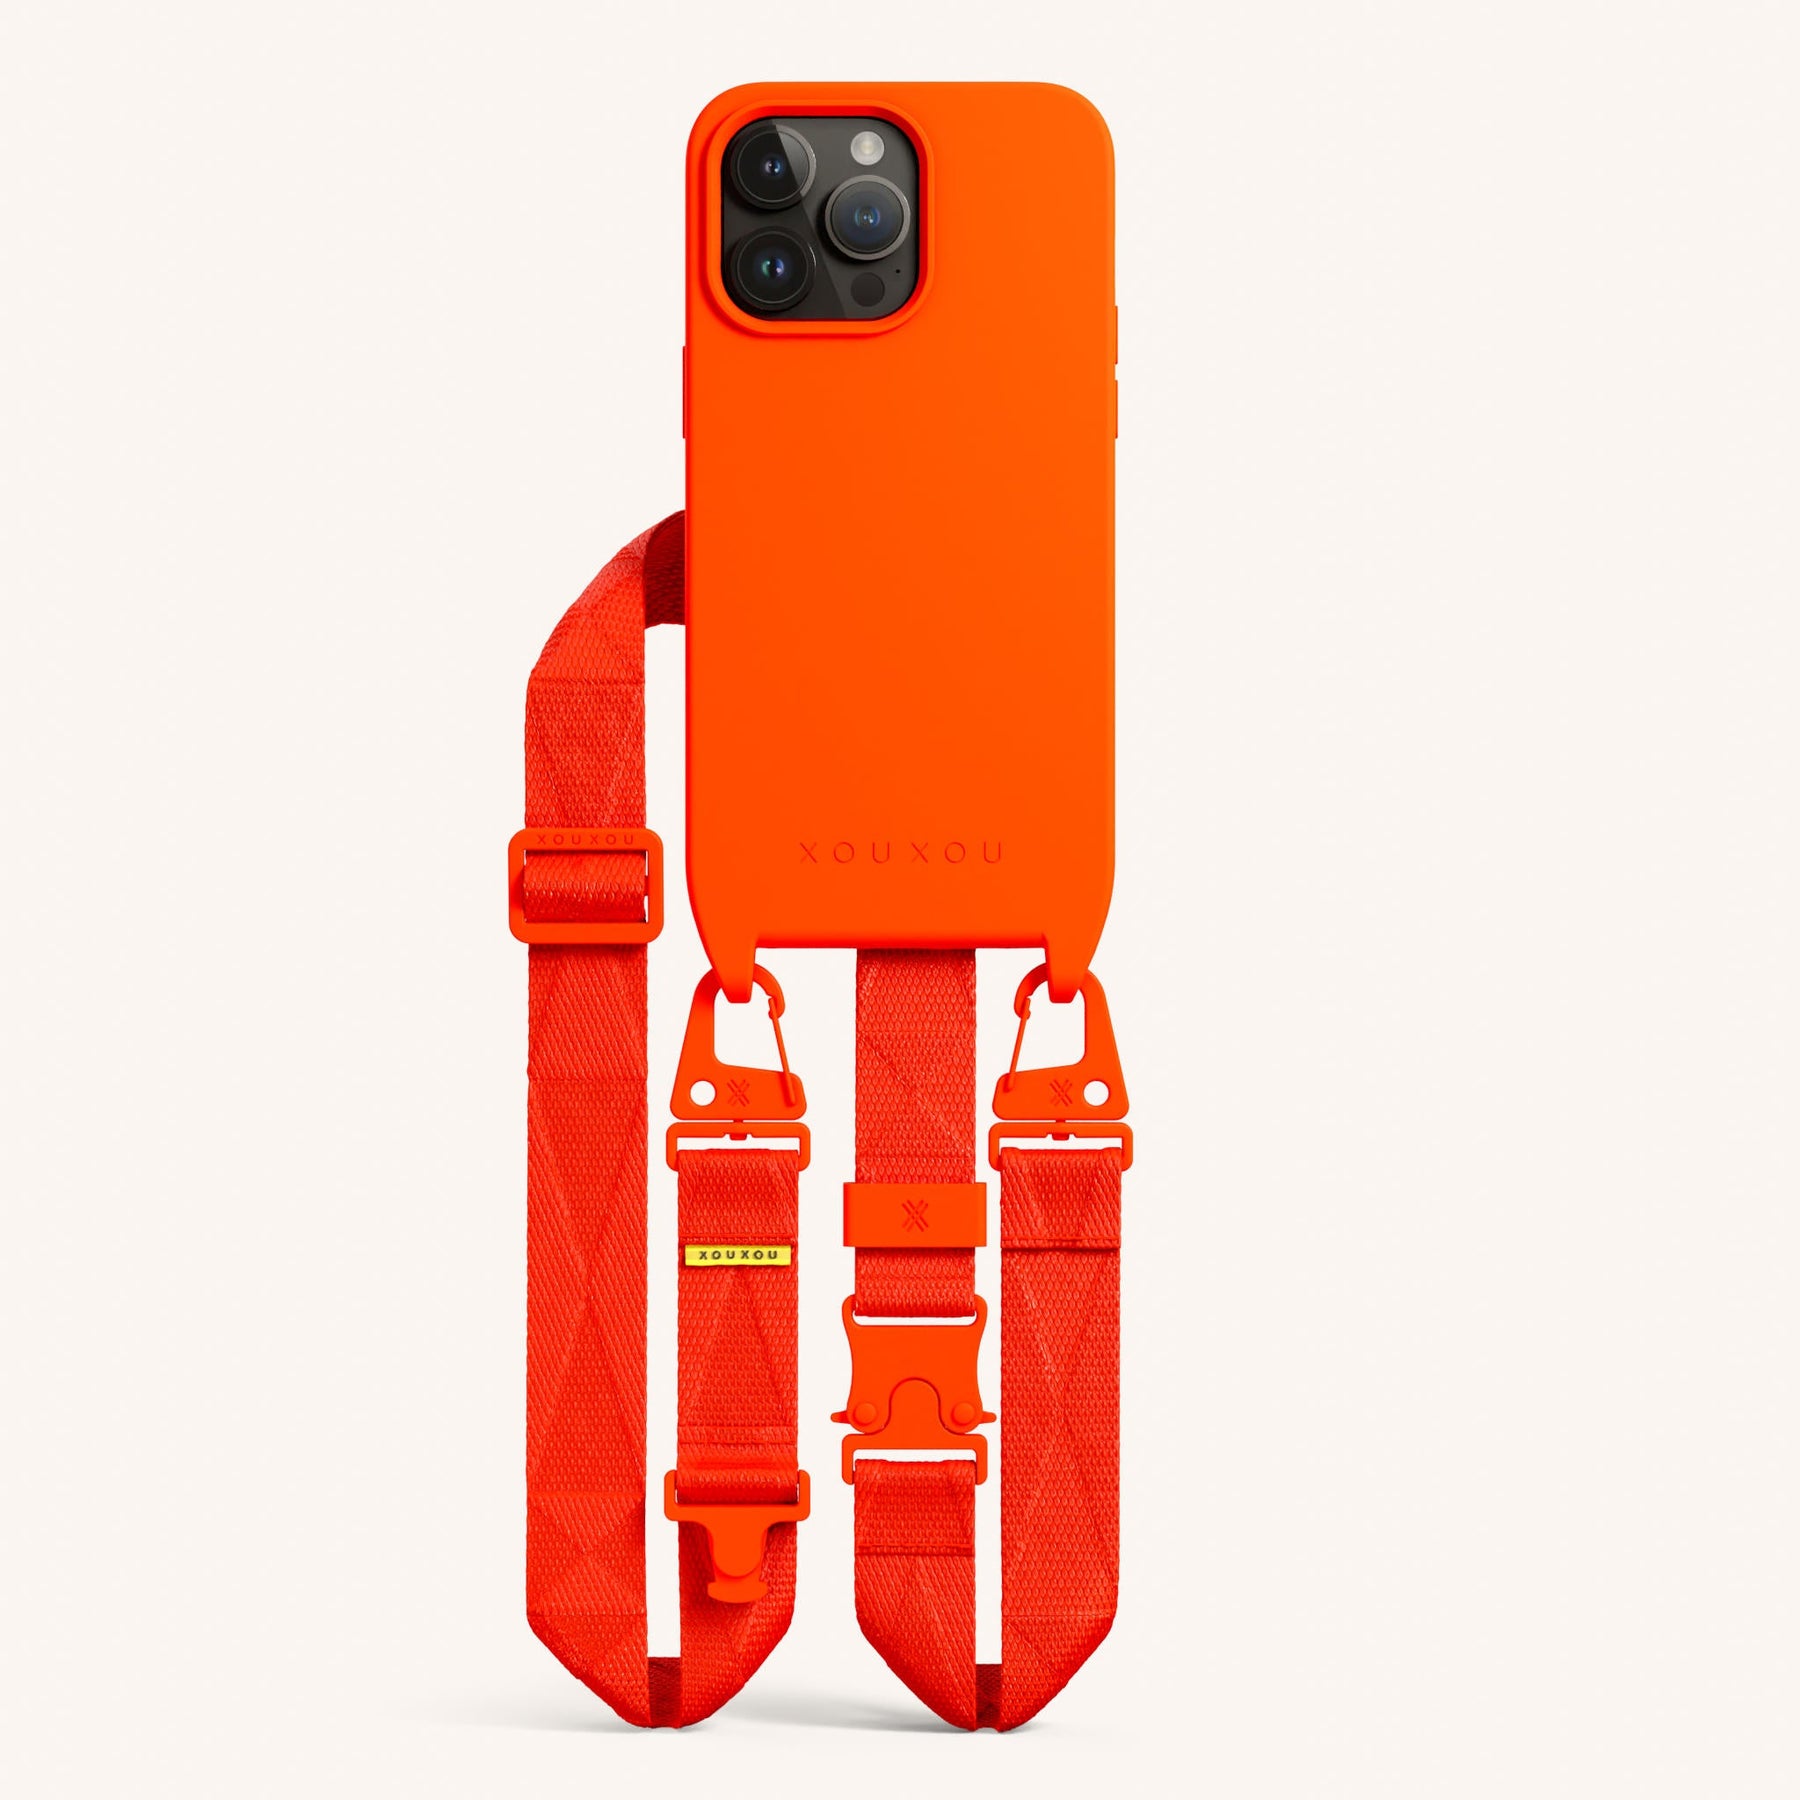 Phone Necklace with Lanyard in Neon Orange